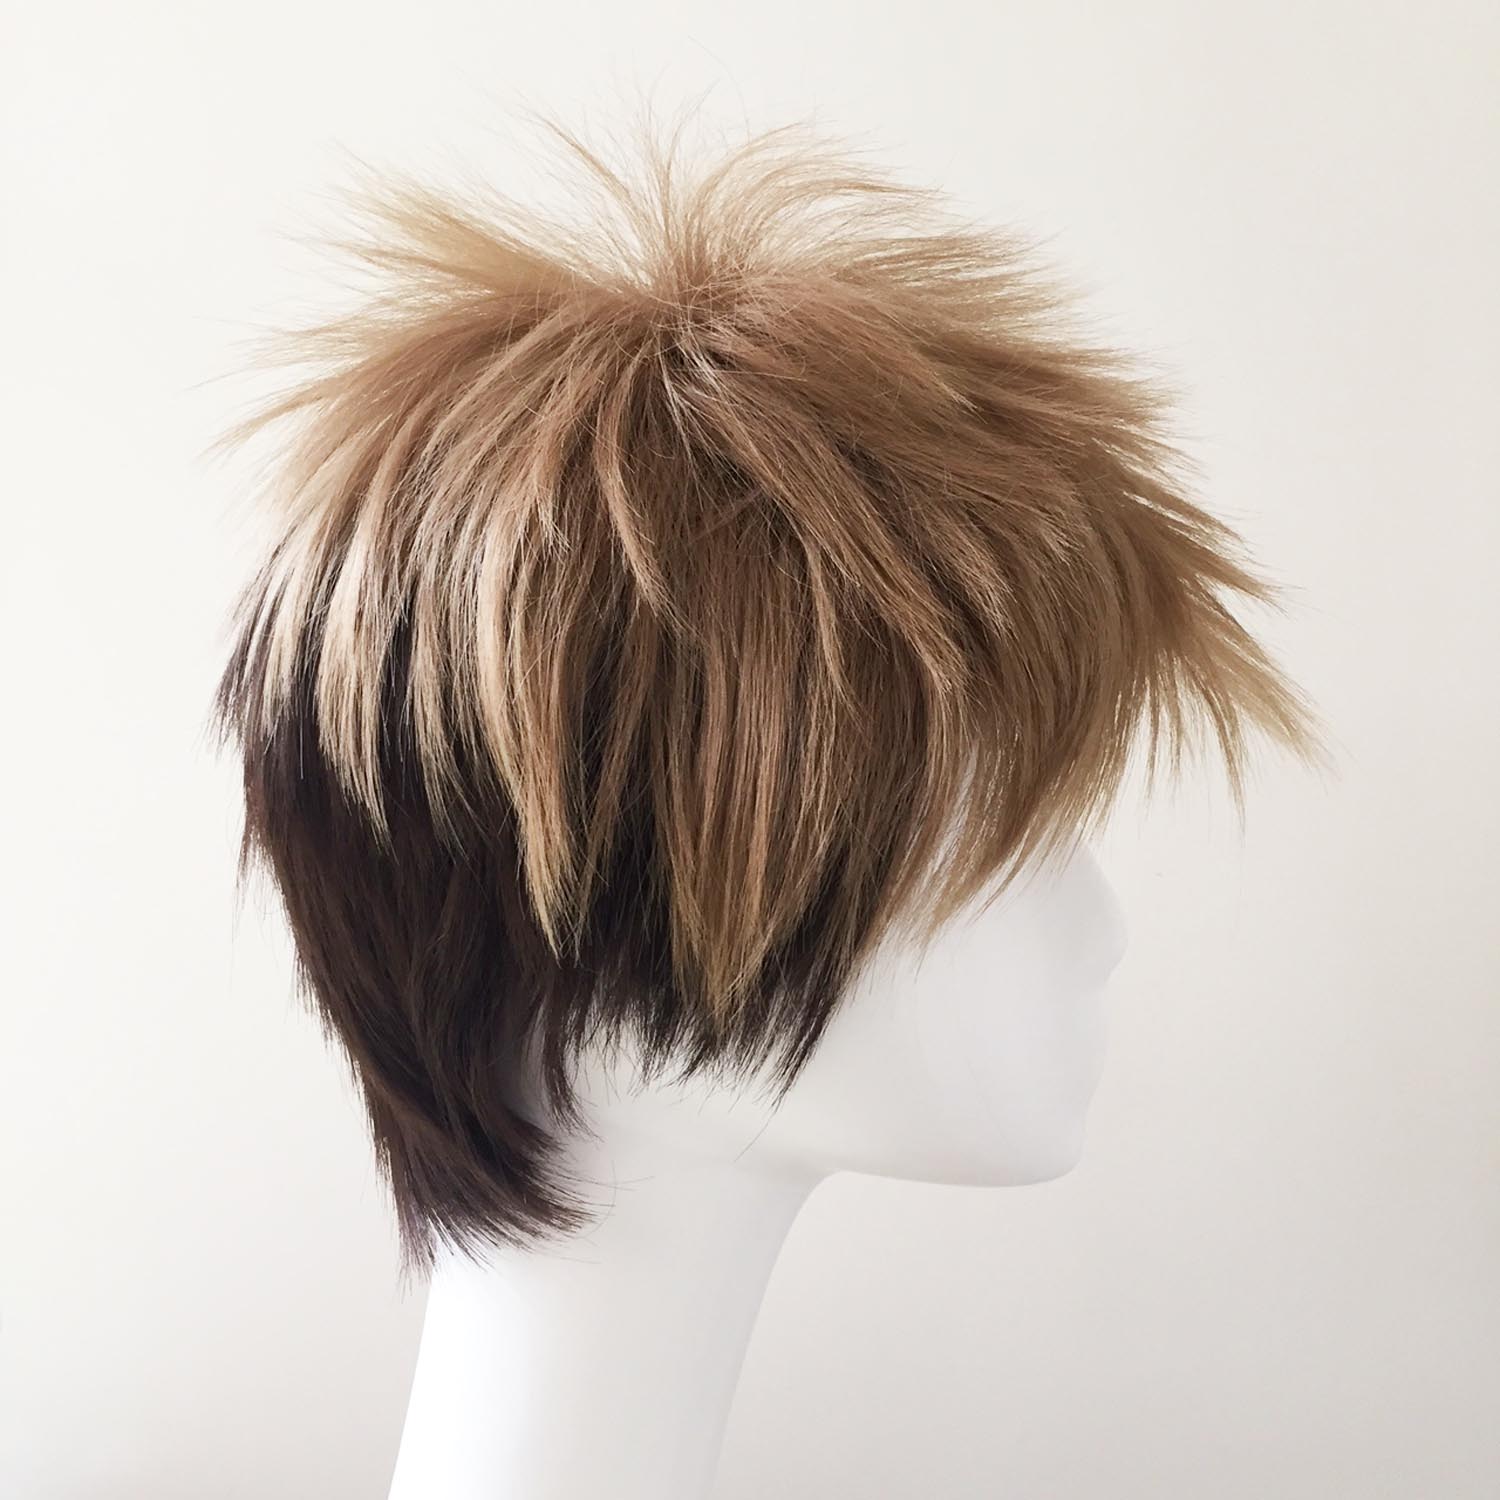 nevermindyrhead Men Brown Two Tone Short Straight Bouncy Fringe Bangs Pixie Cosplay Wig